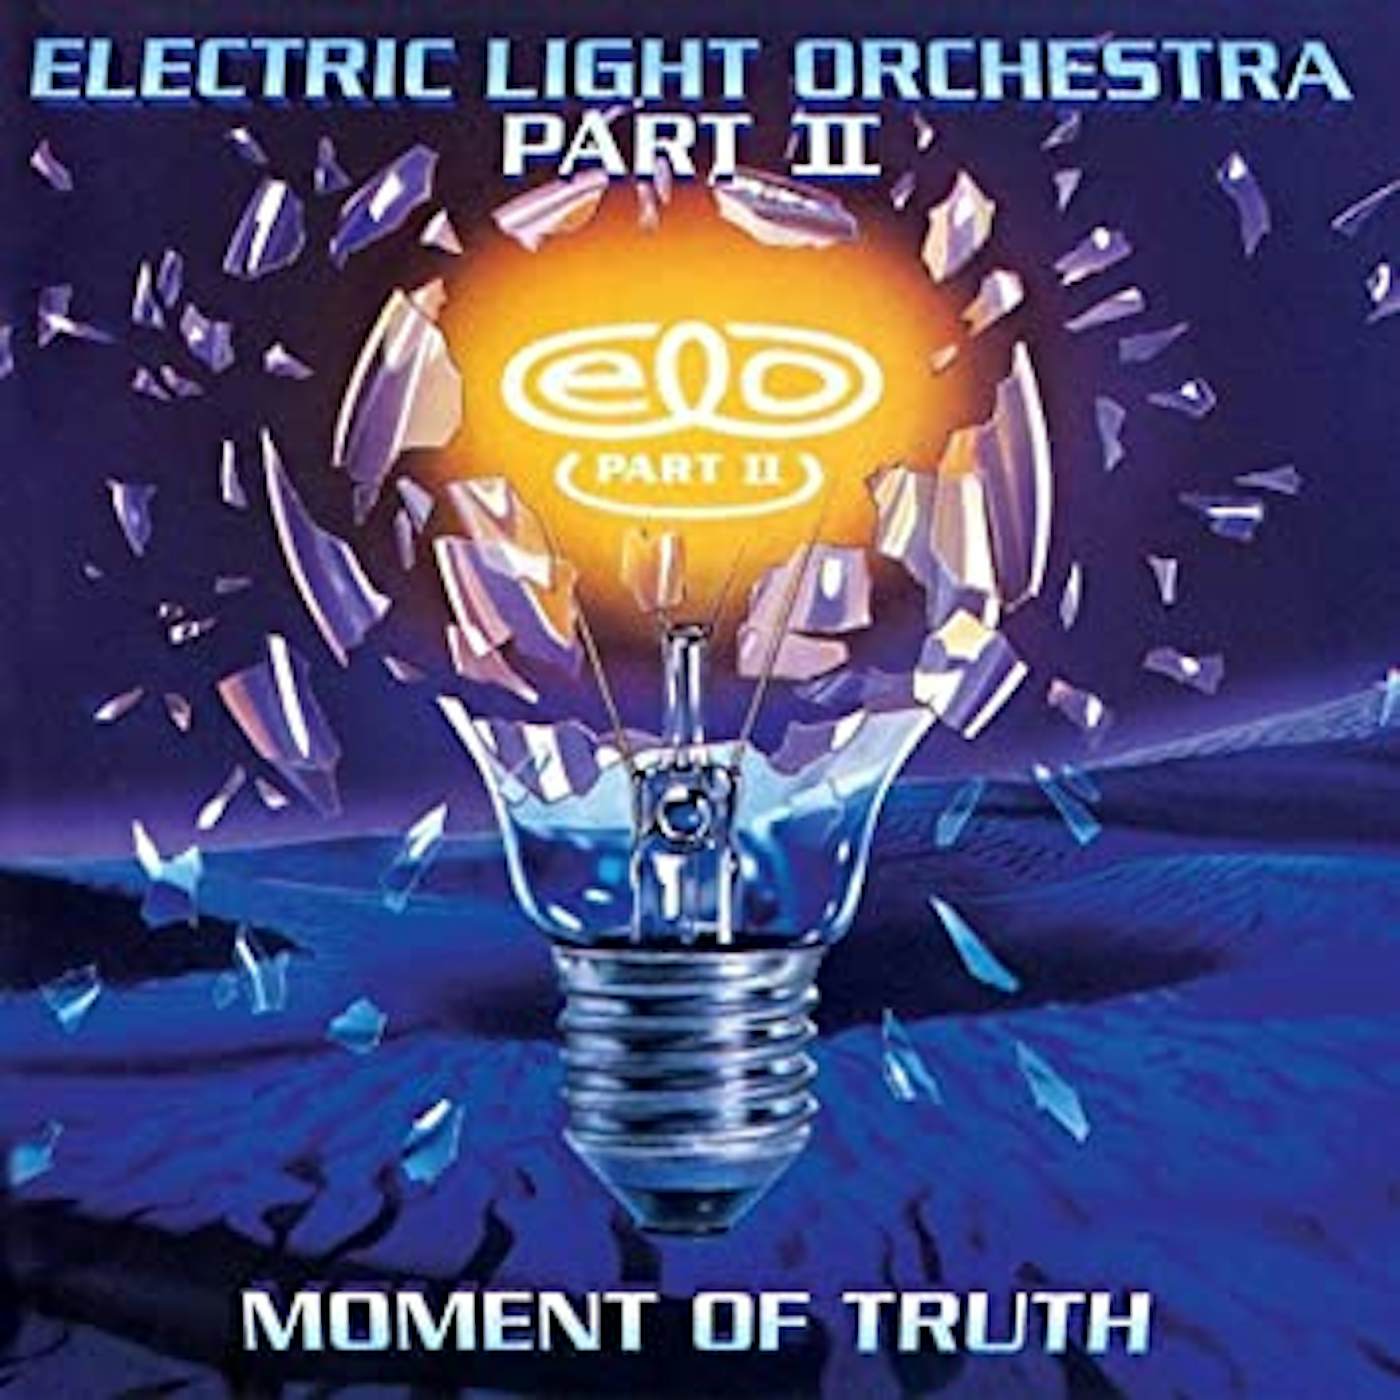 ELO (Electric Light Orchestra) Moment Of Truth Vinyl Record